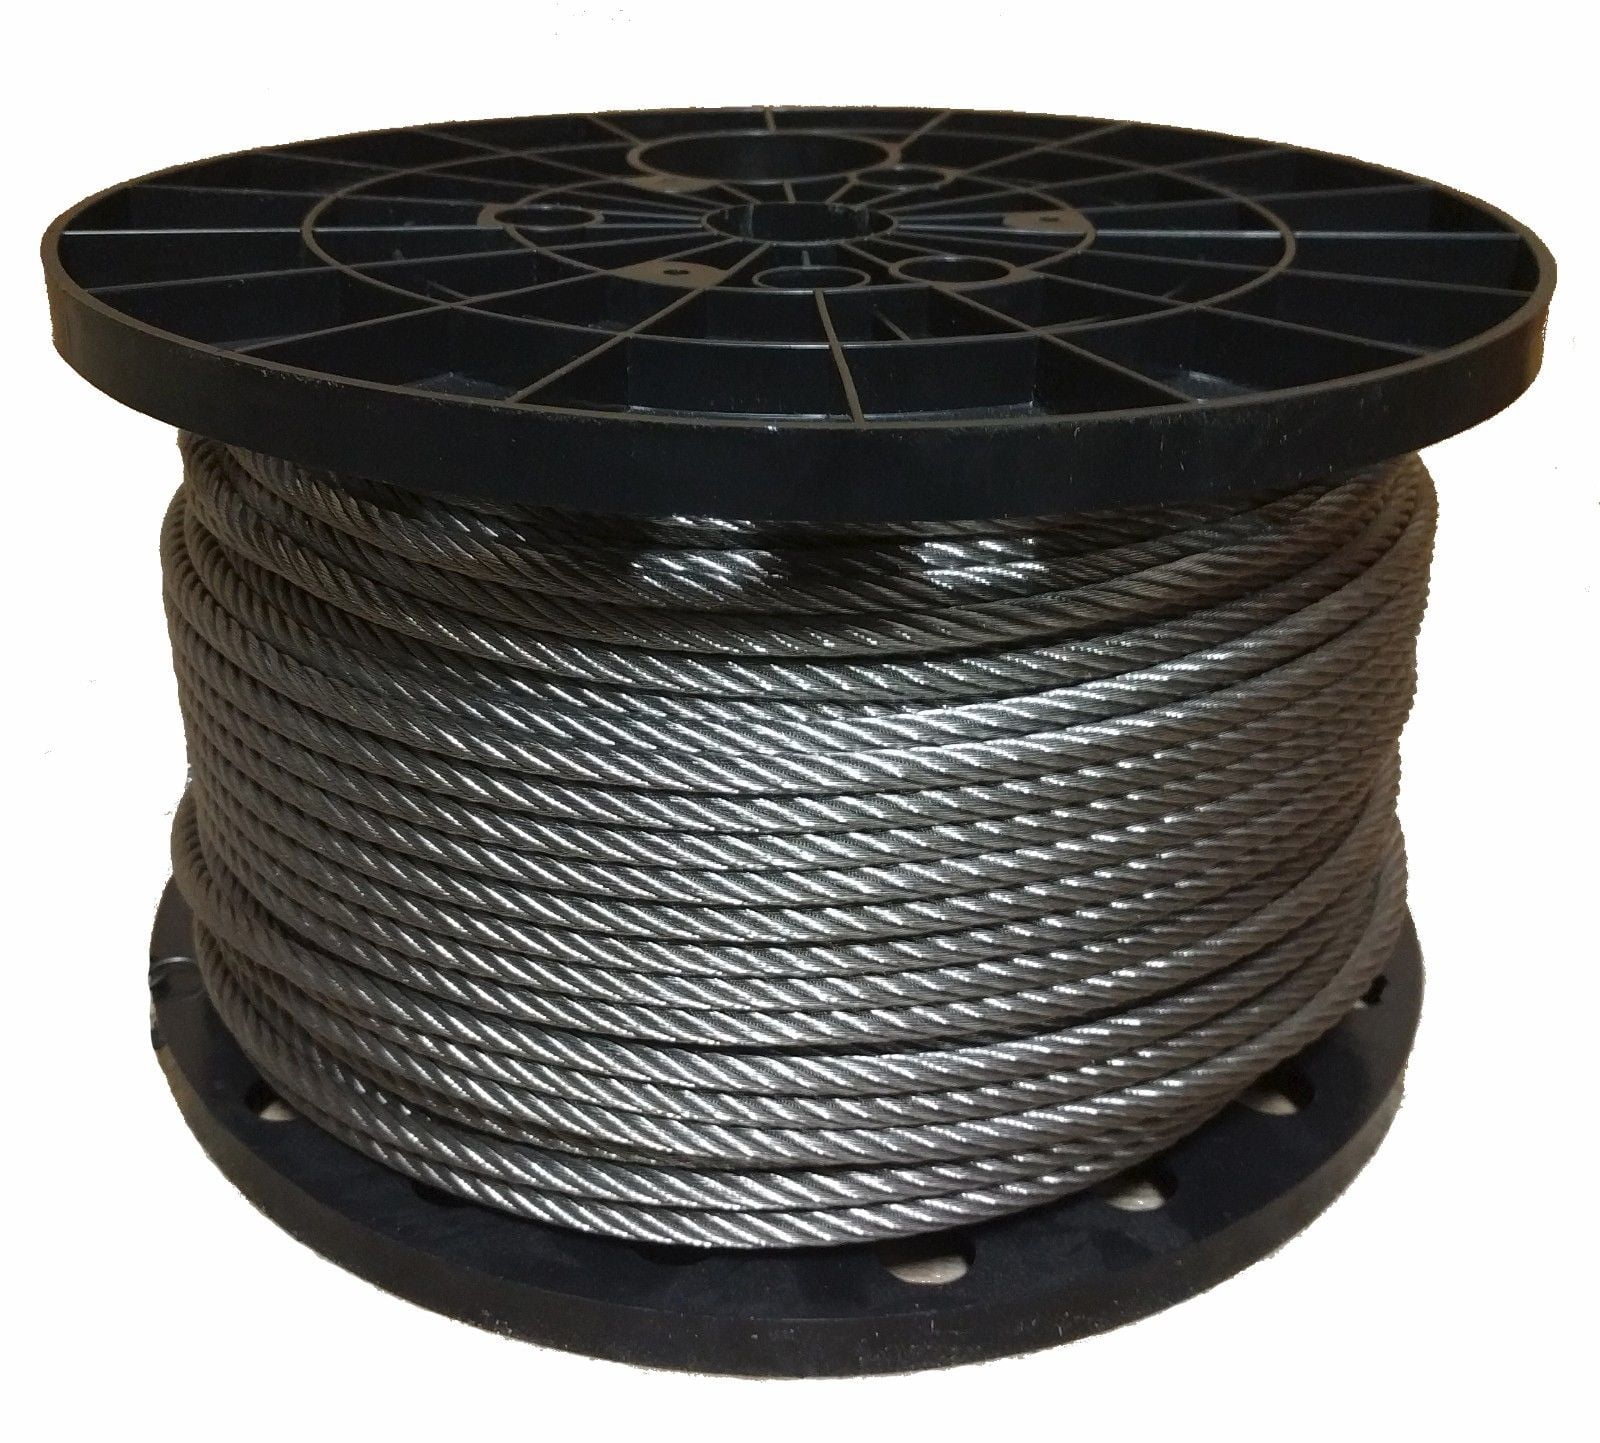 7 Ft Cable Length Black Oxidize Galvanized Steel Wire Rope 1/8” 7X19 Stage Theater Display Cable Cable Only 